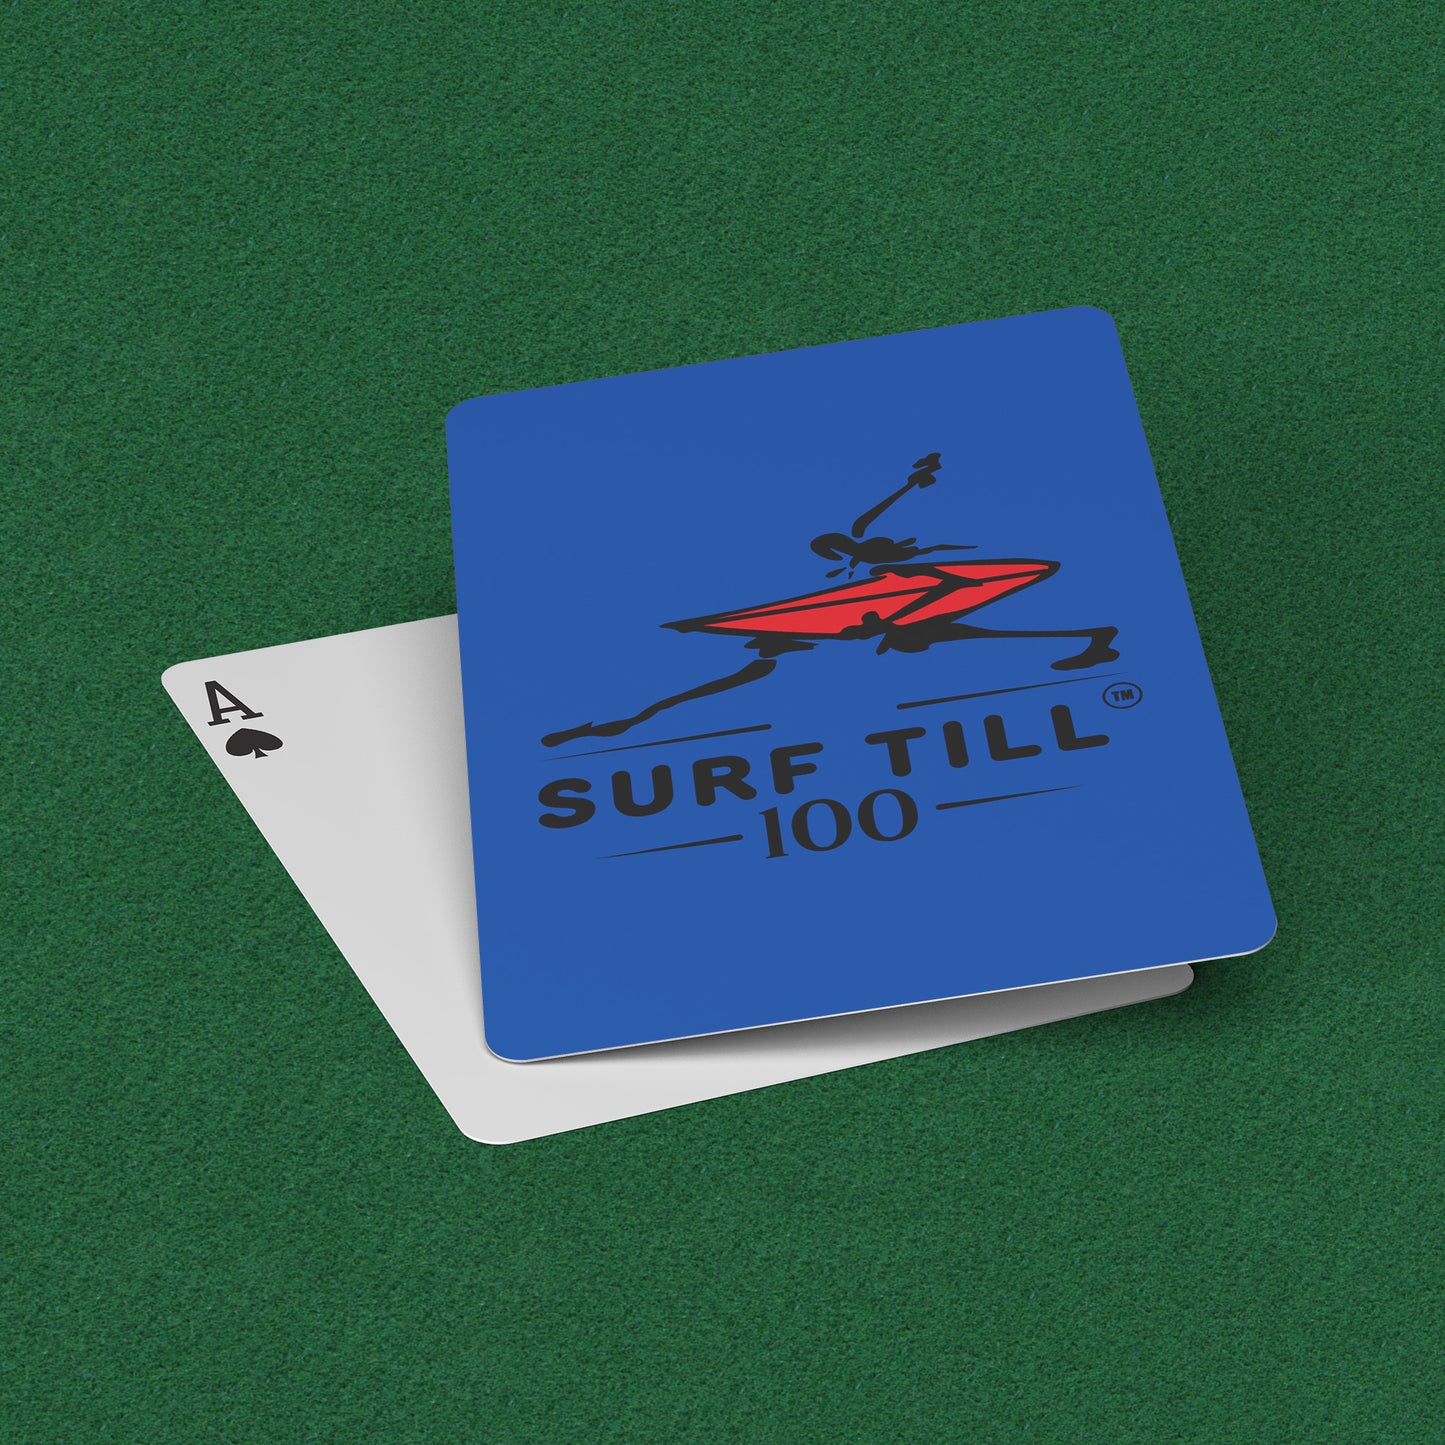 Surf Till 100 Deck of 52 Playing Cards